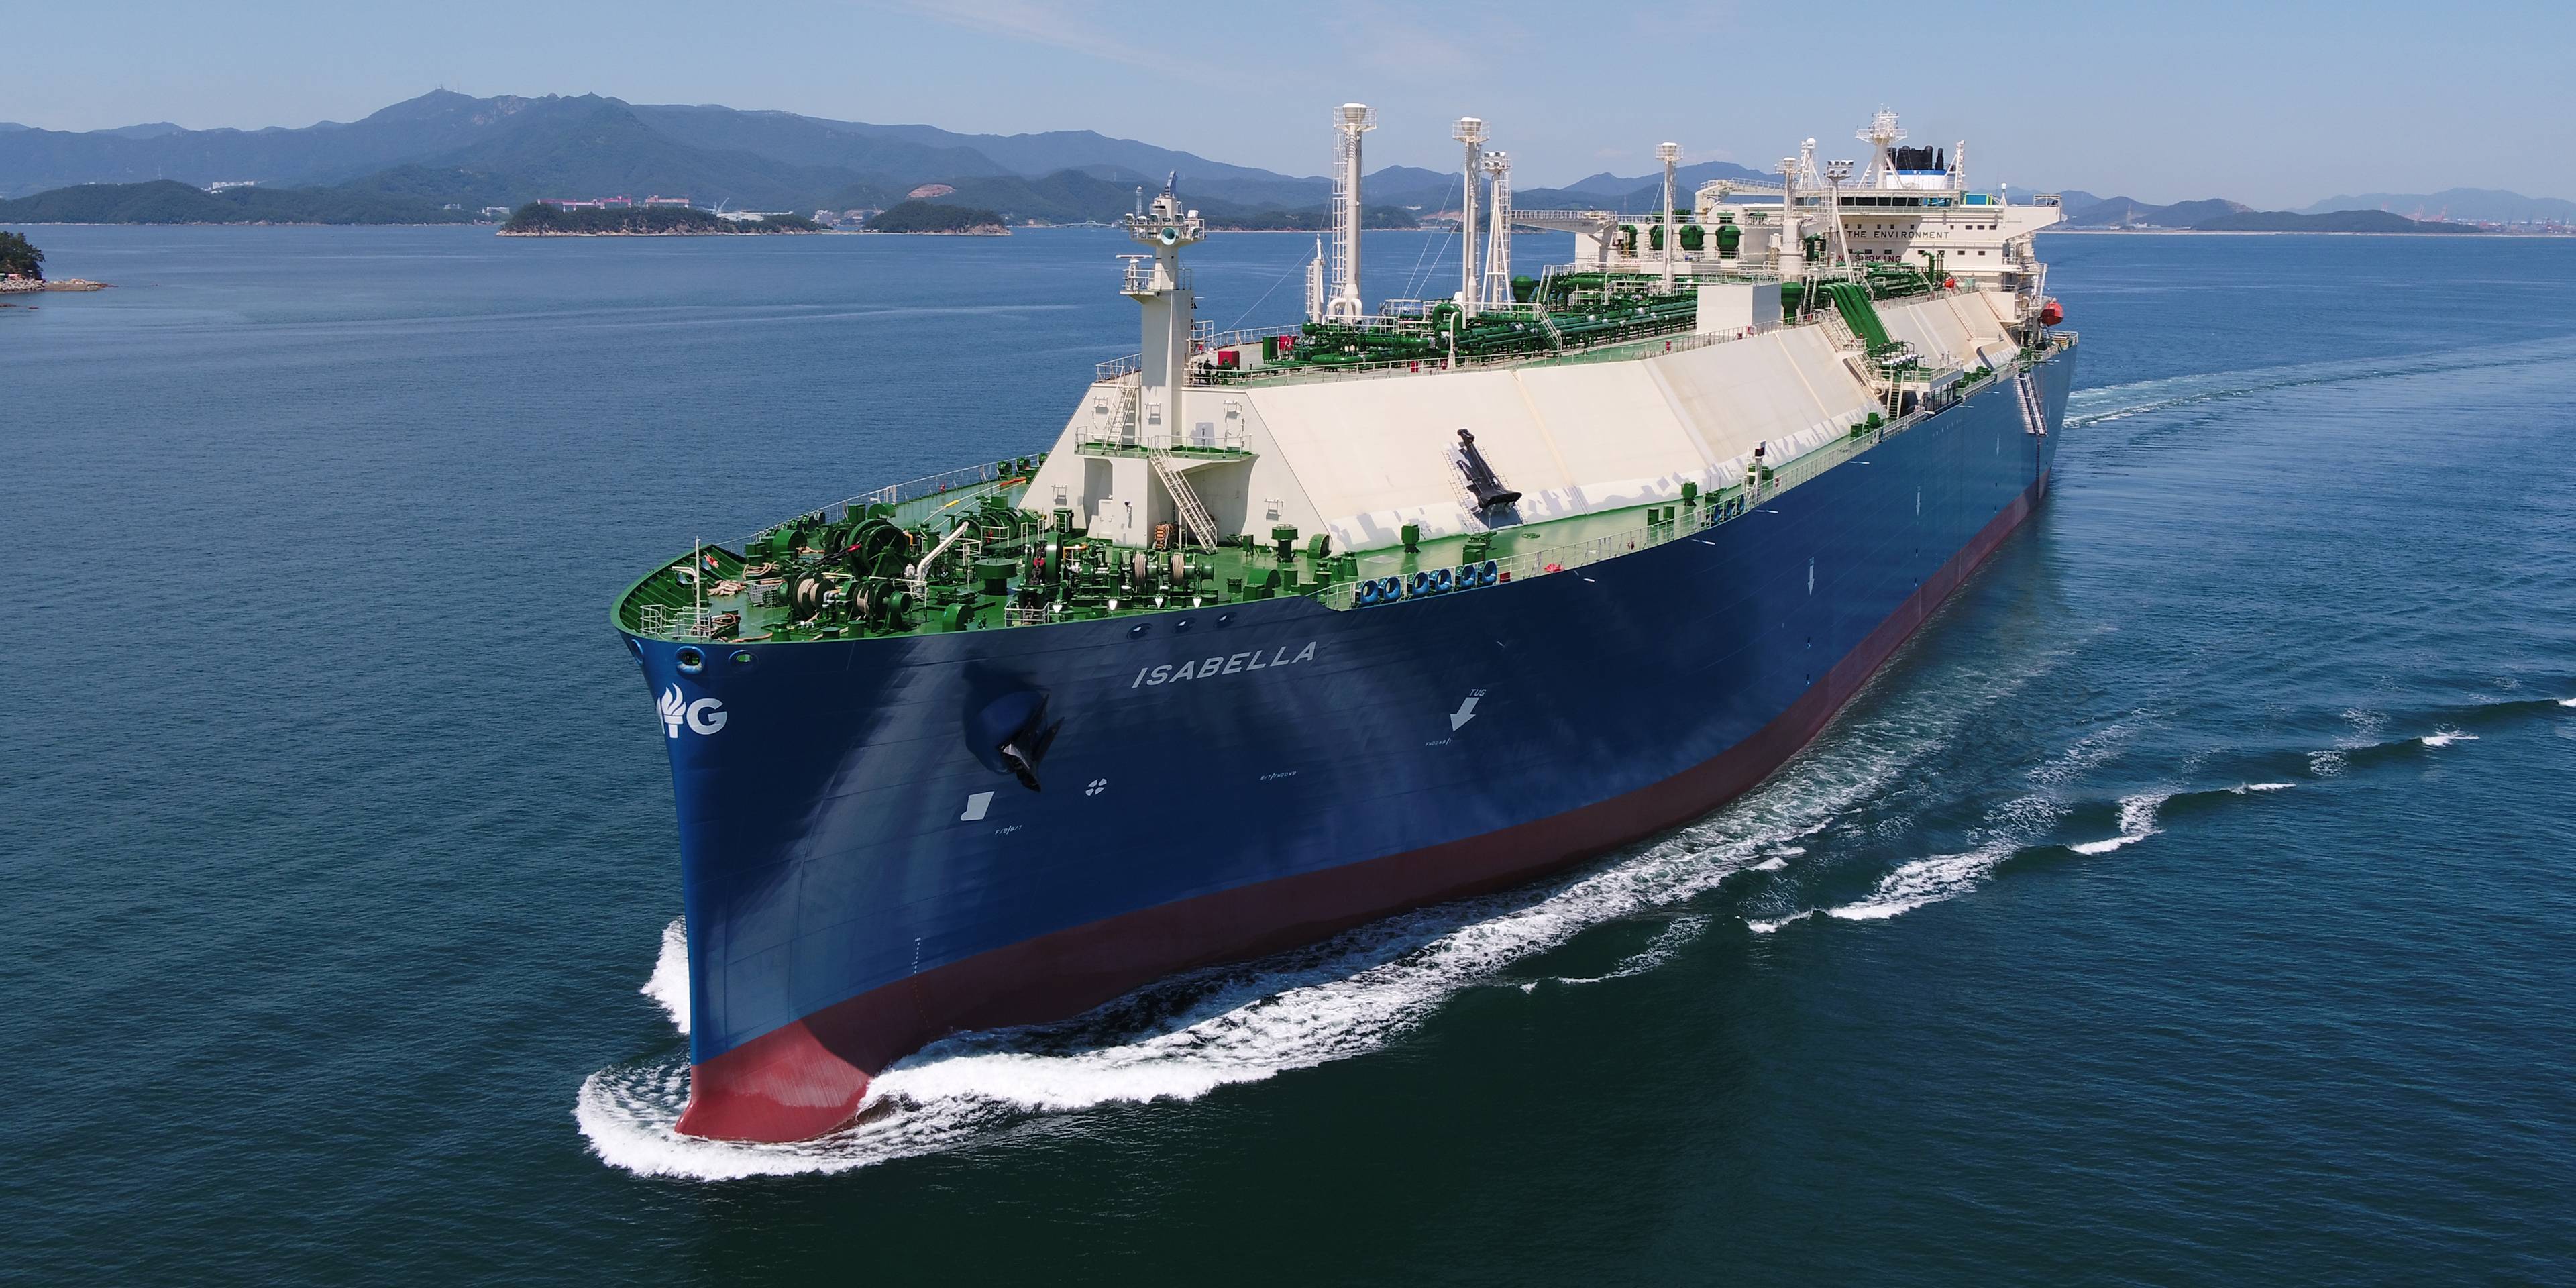 The Isabella LNG tanker